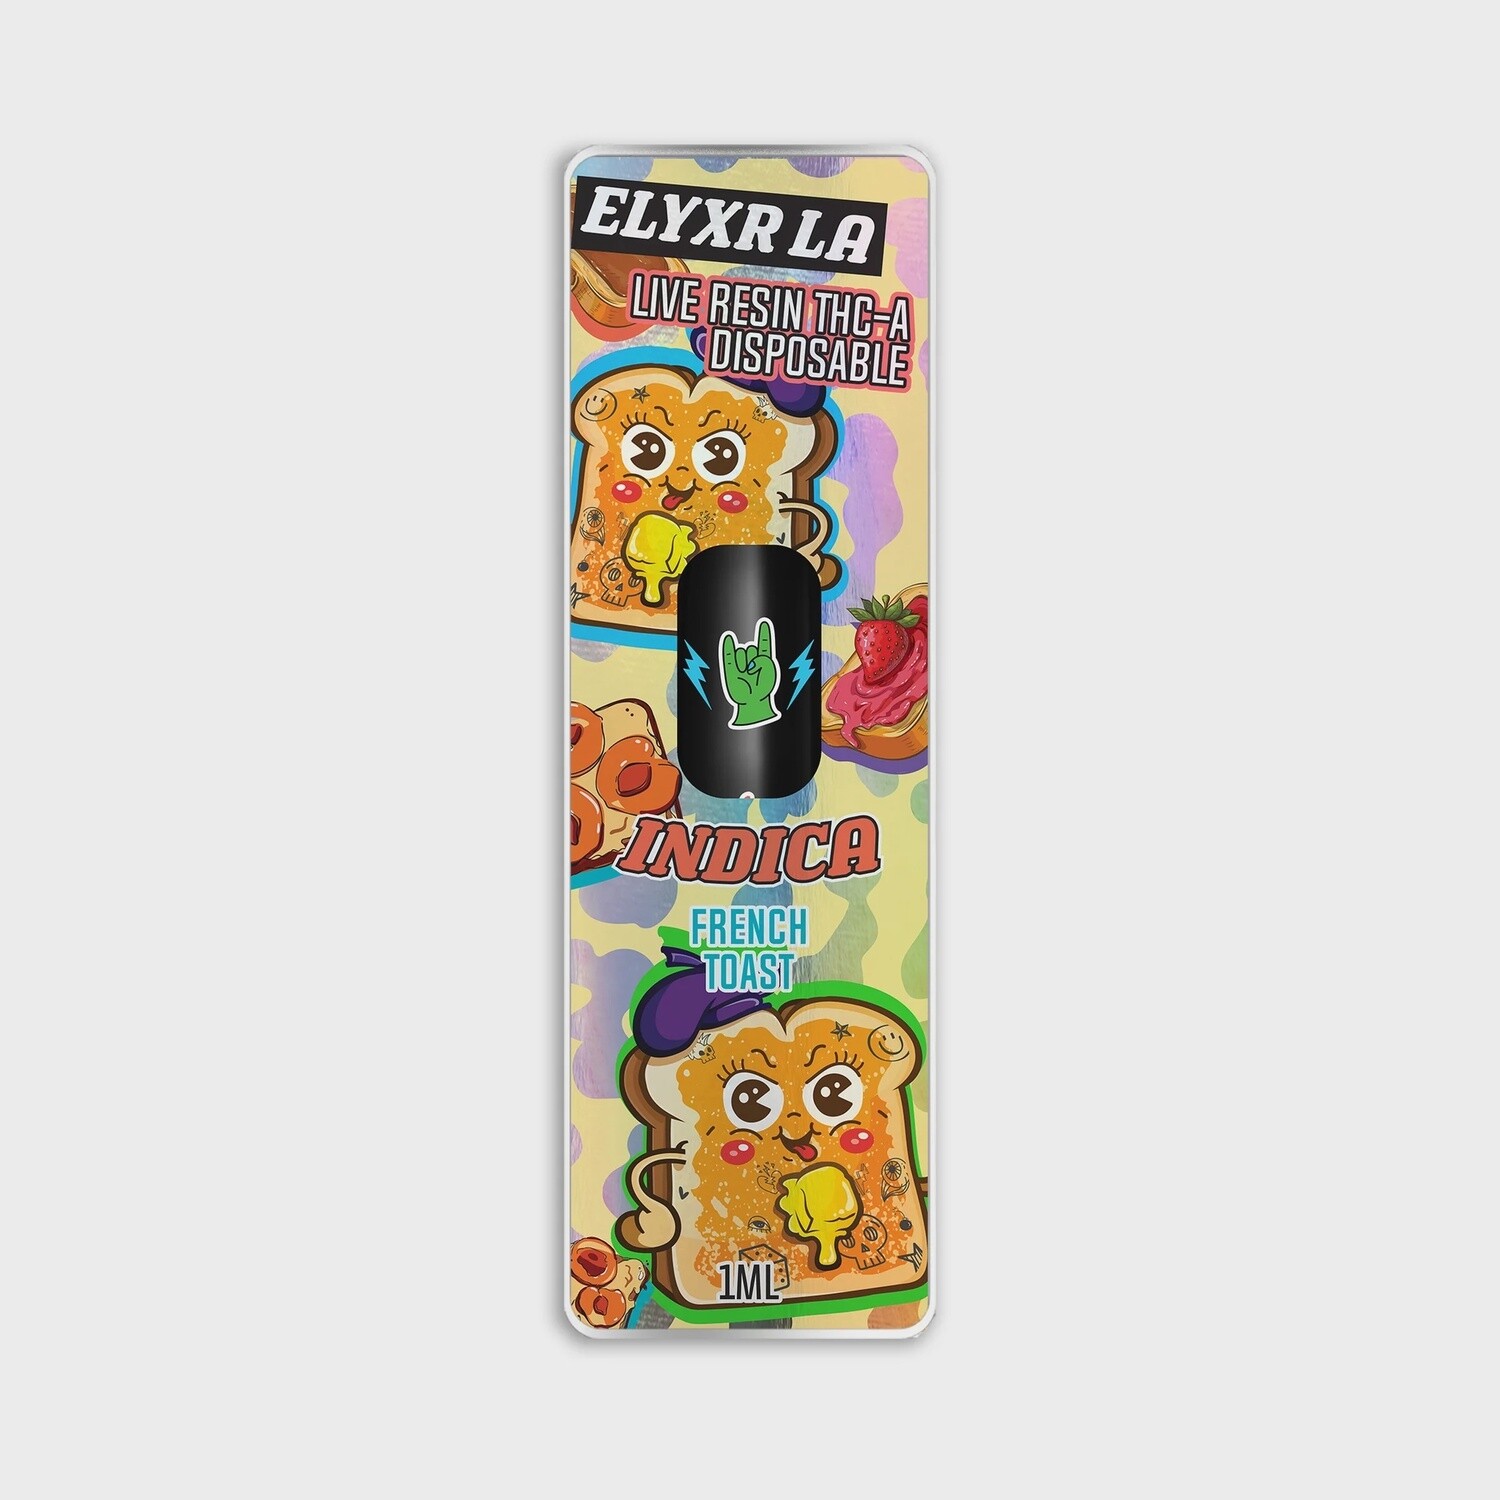 Elyxr THC-A French Toast Live Resin Disposable 1g